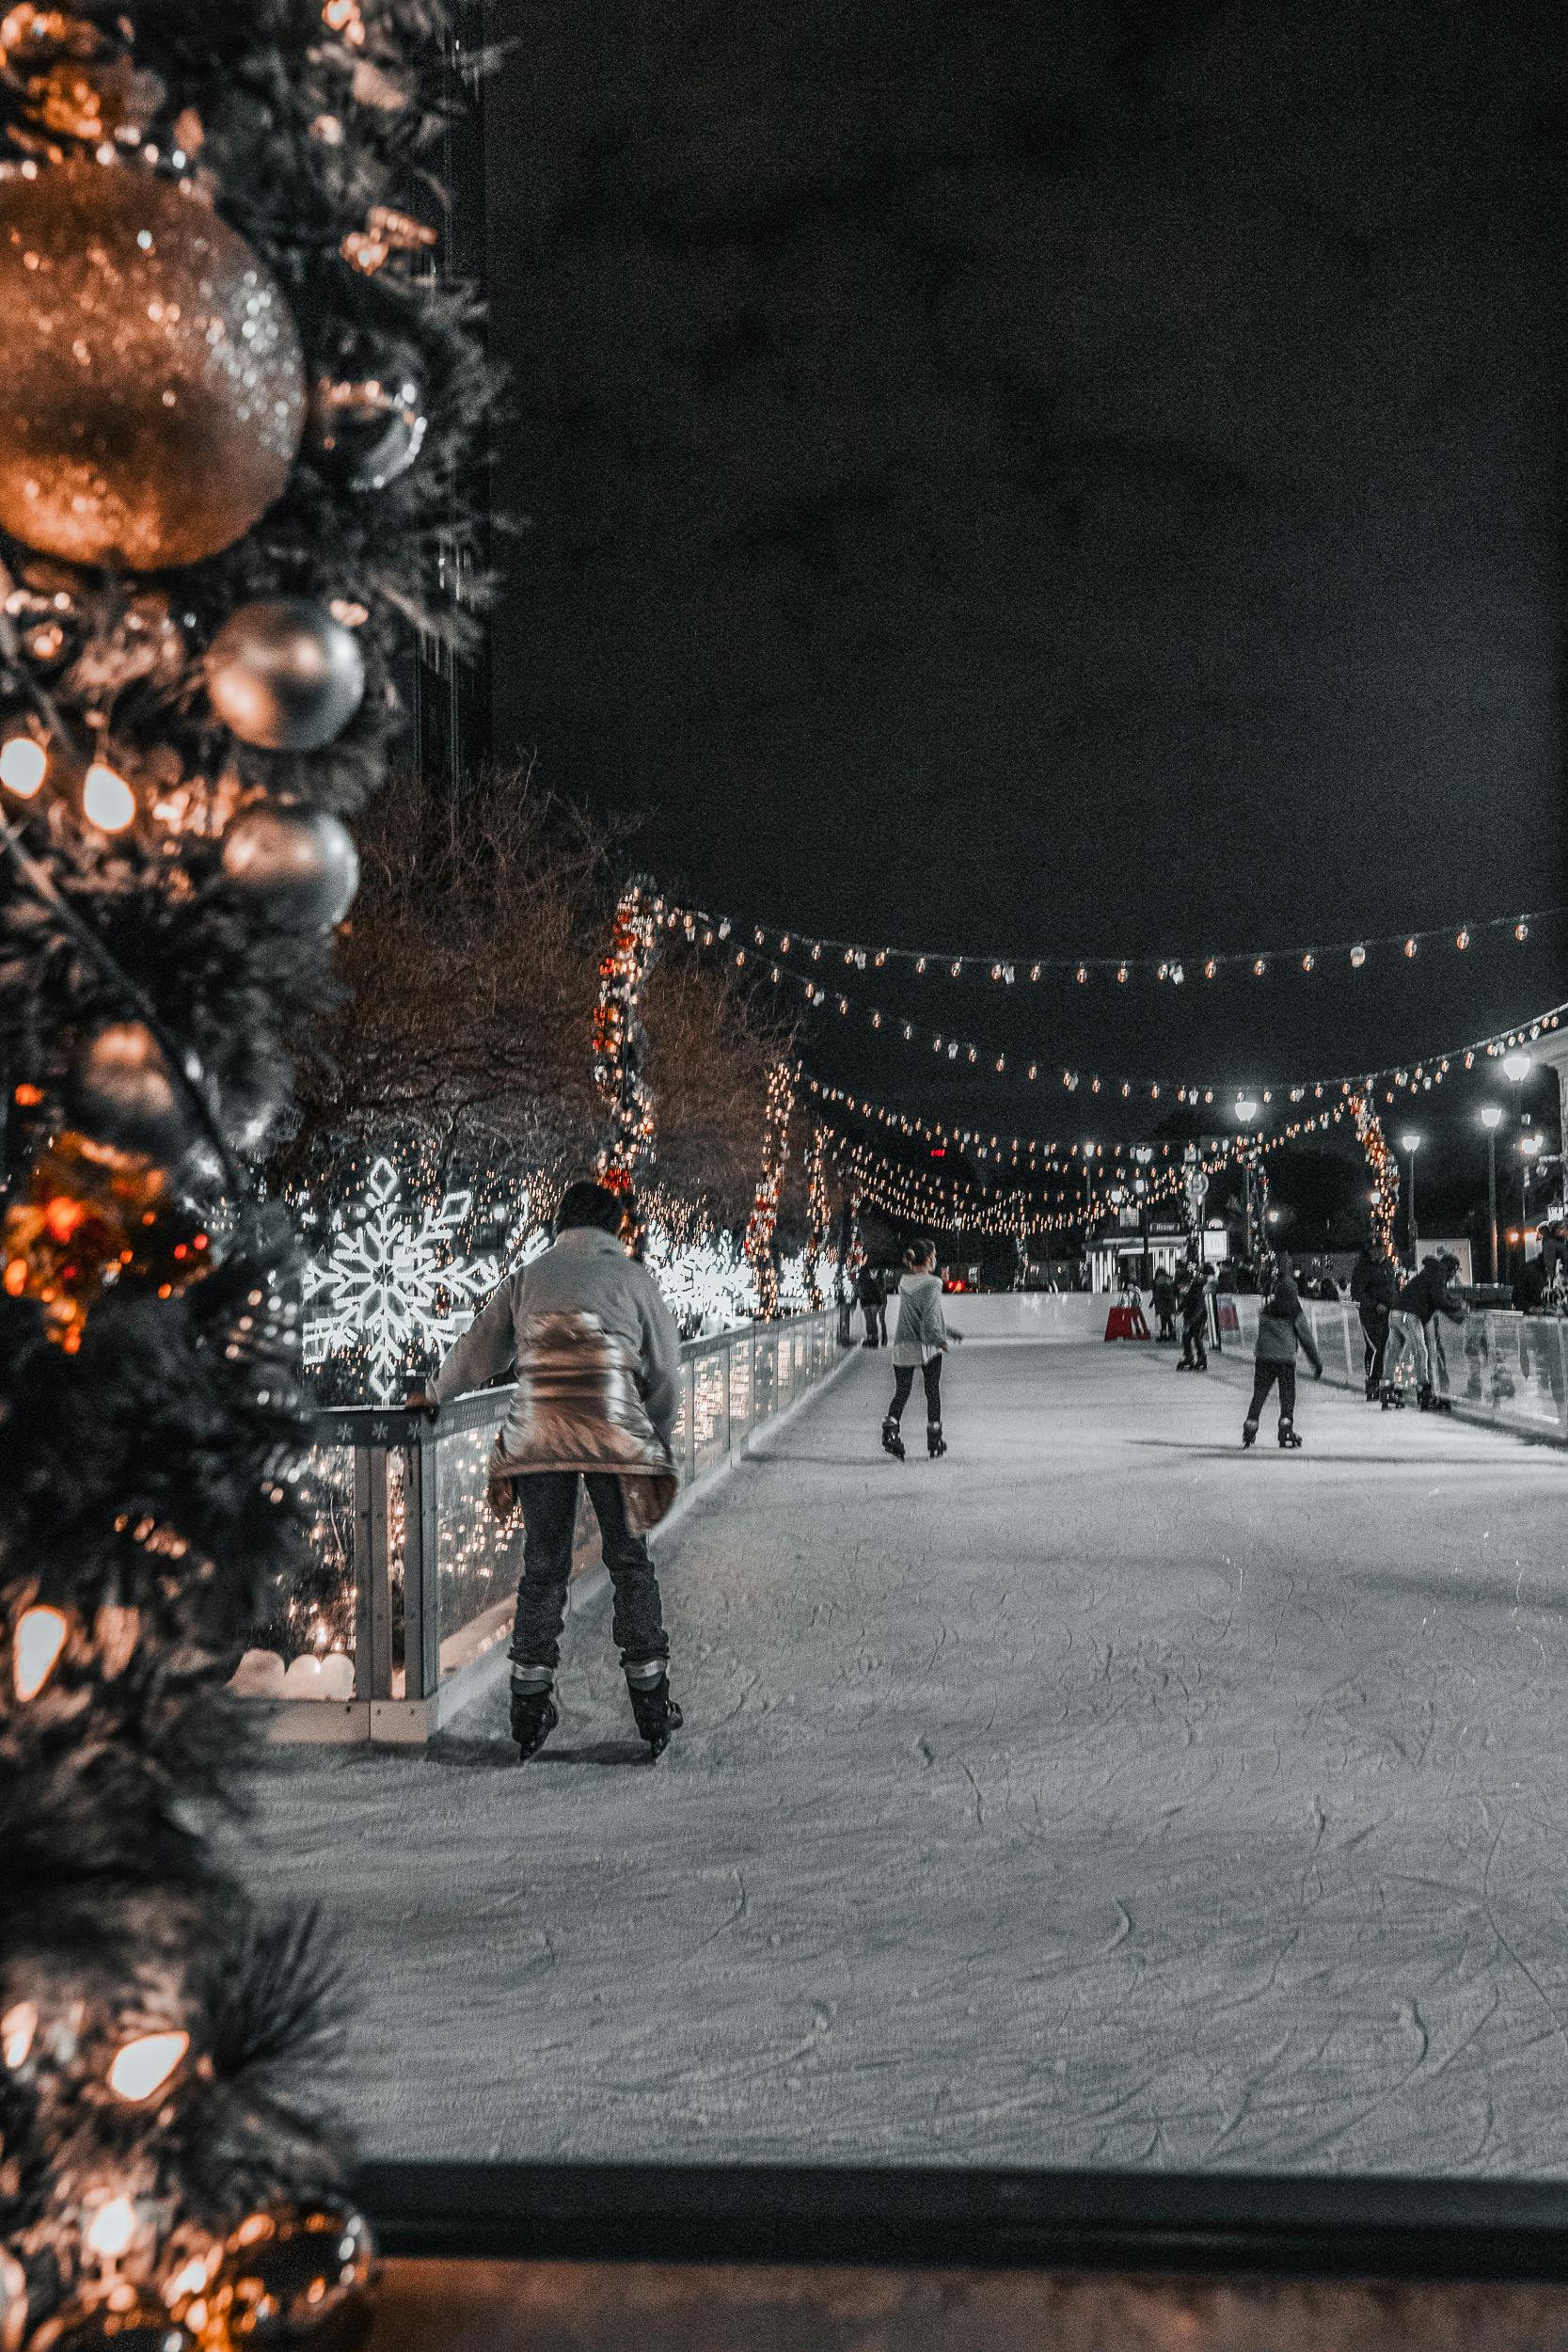 People Ice Skating During Night Time